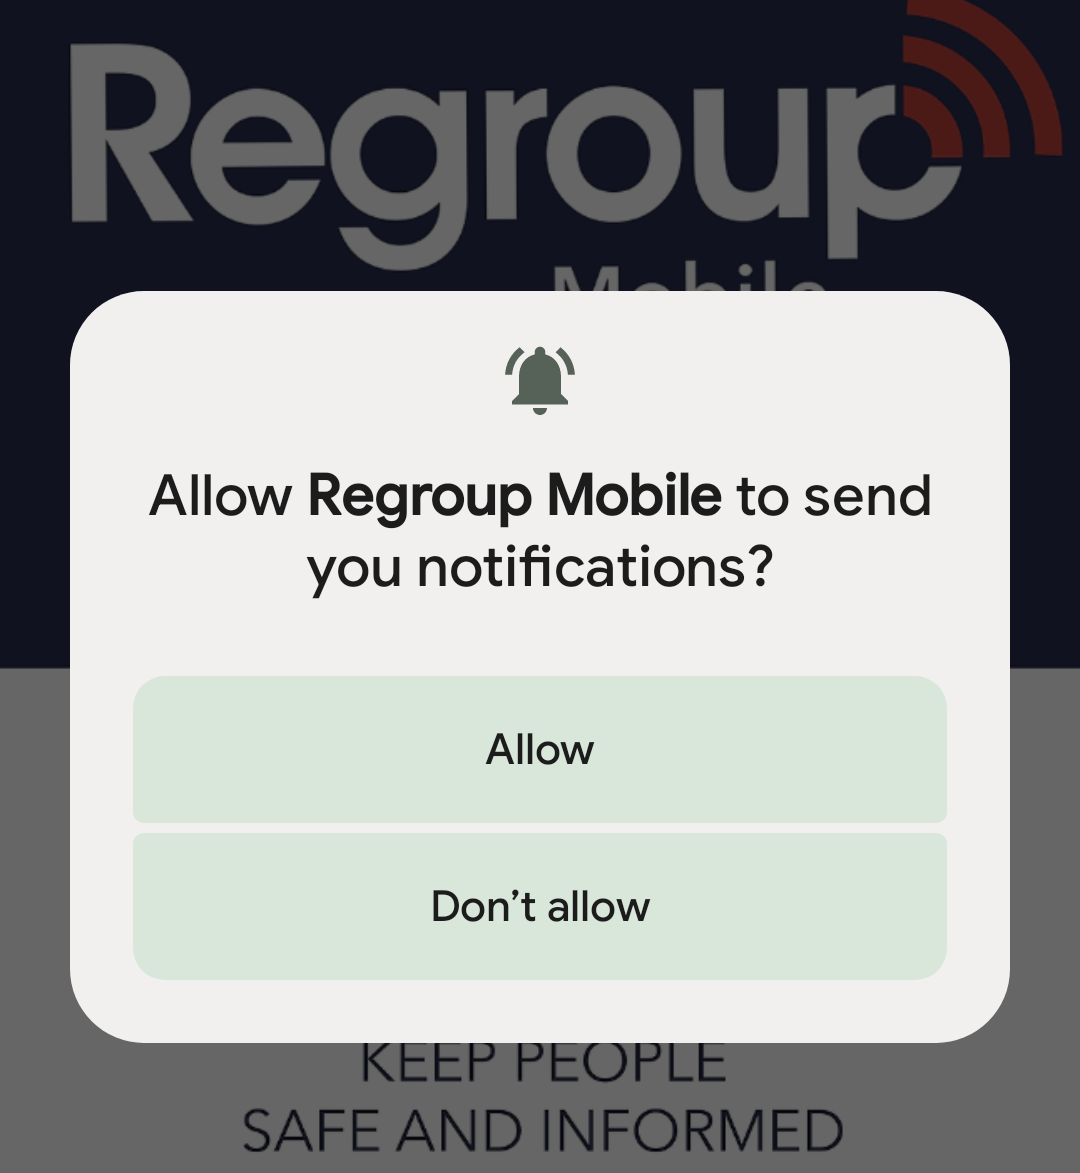 Regroup mobile app allow notifications